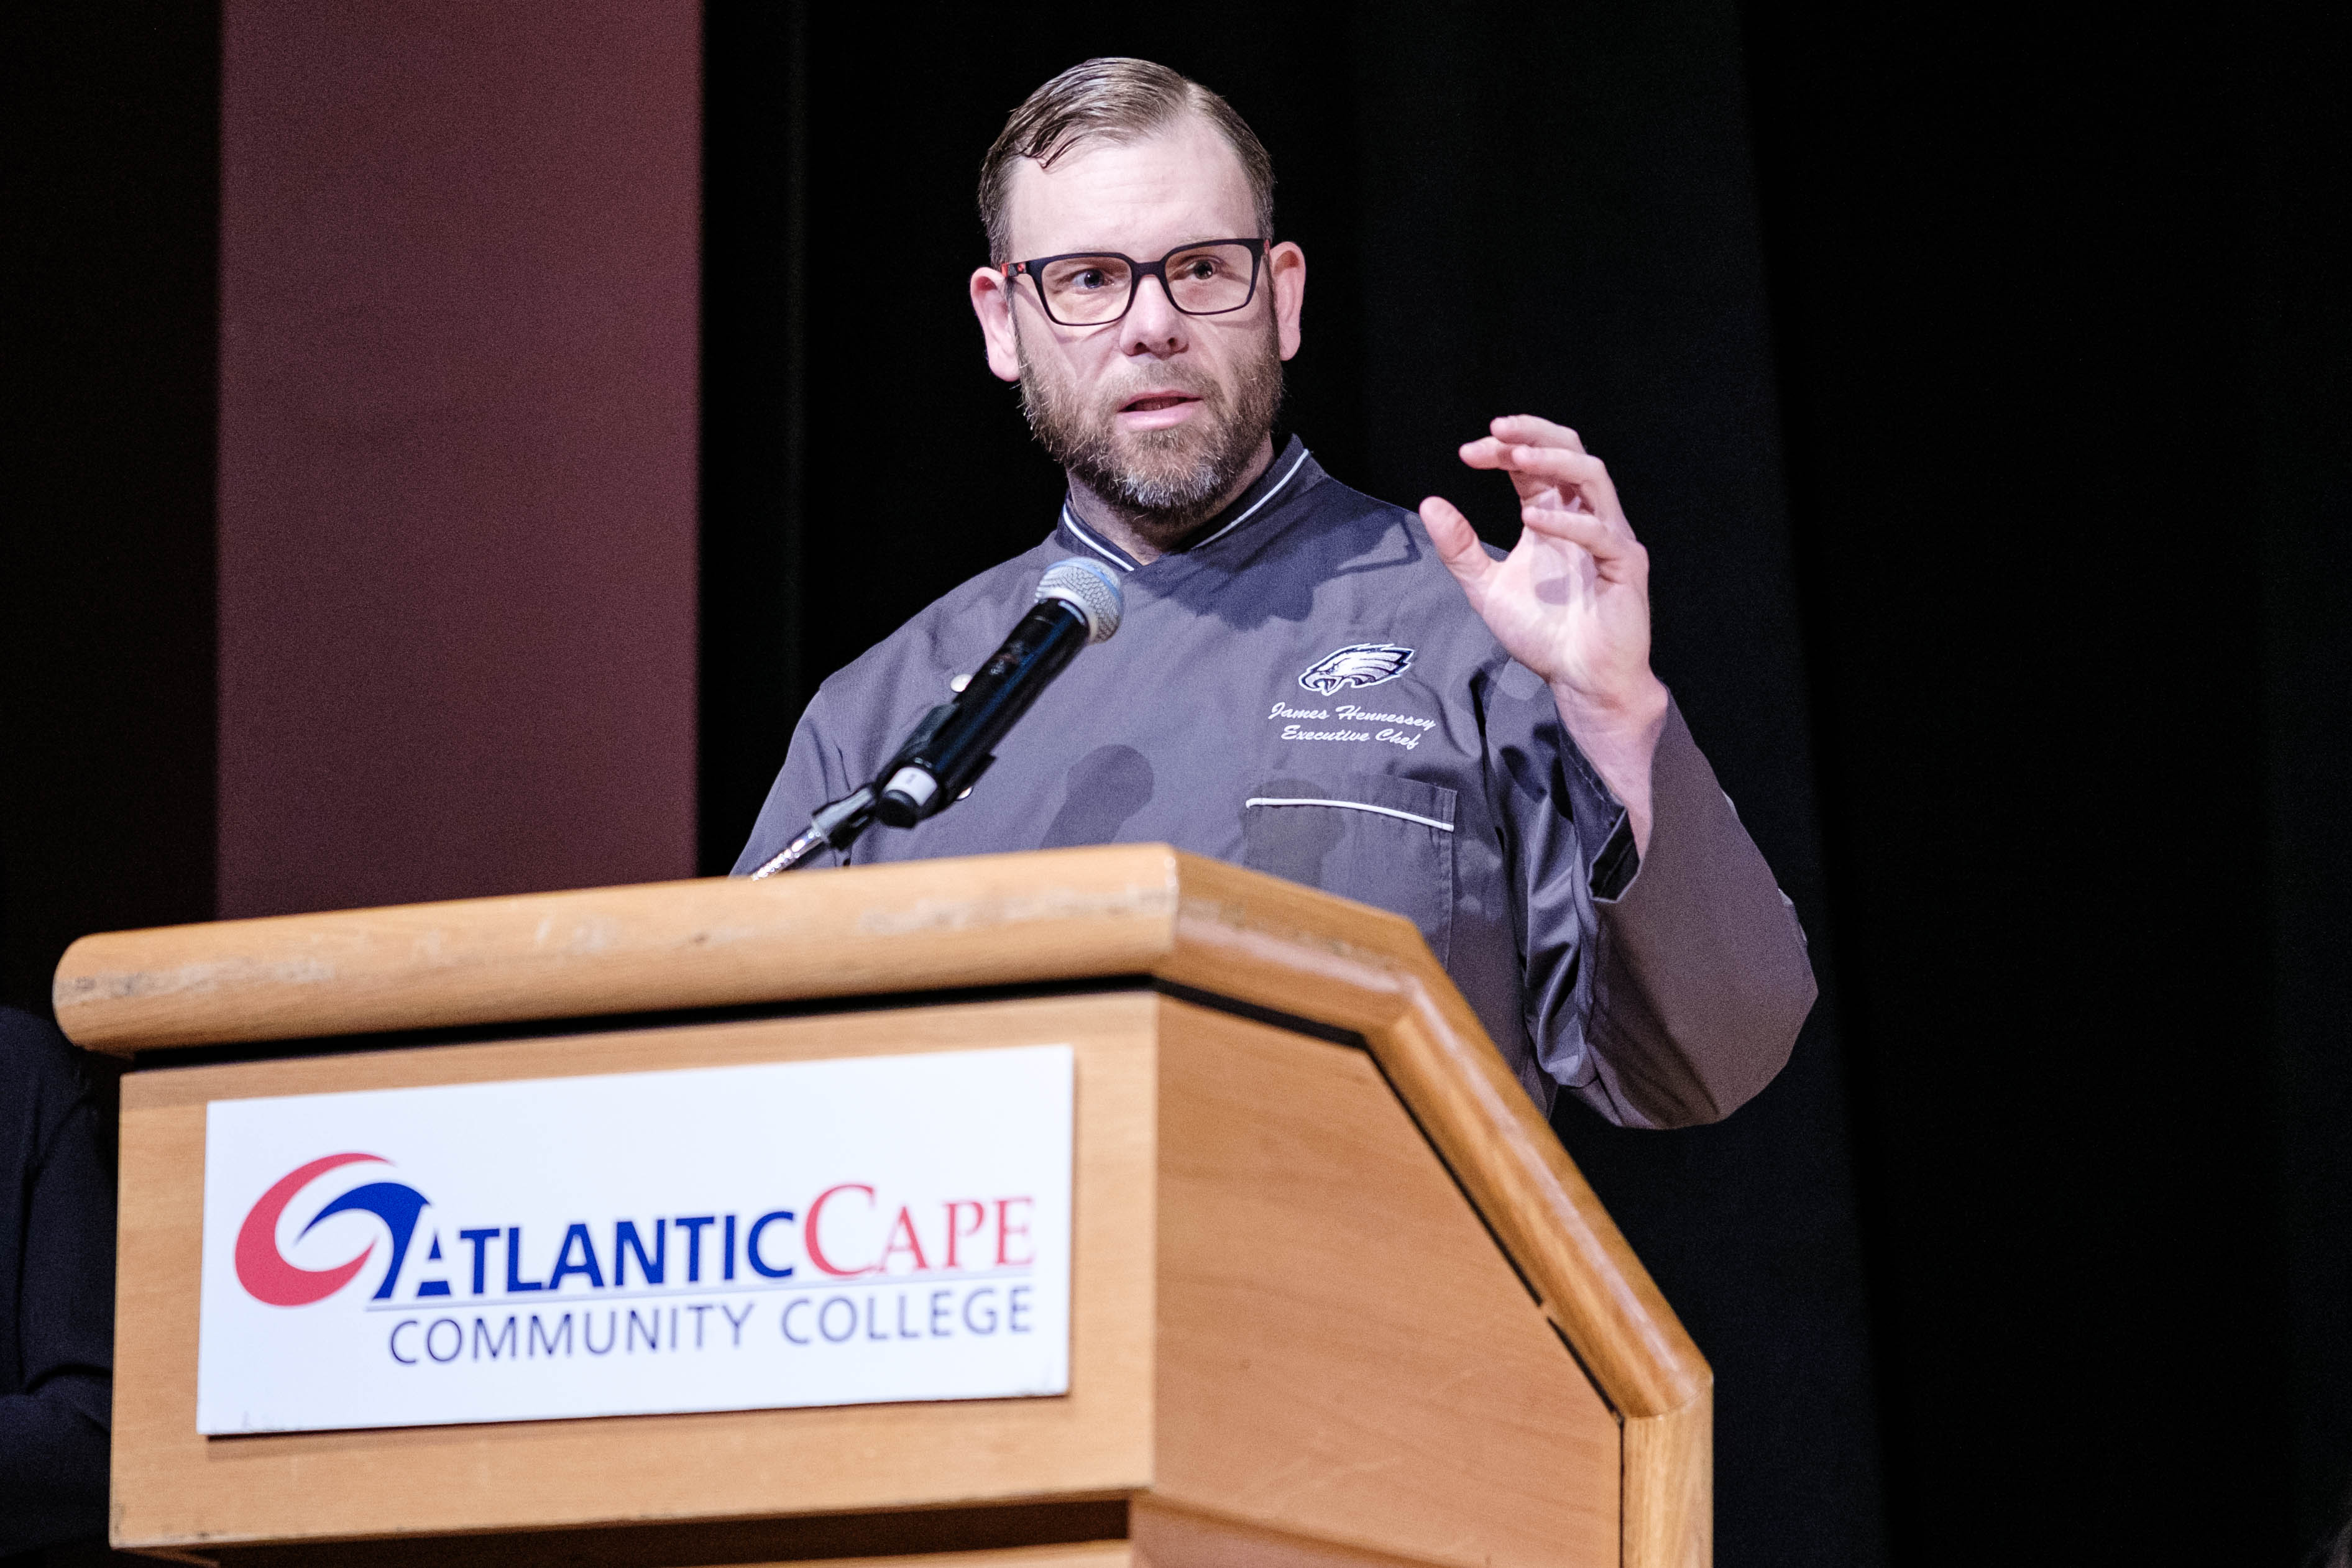 Executive Chef James Hennessey speaks to the audience and graduates